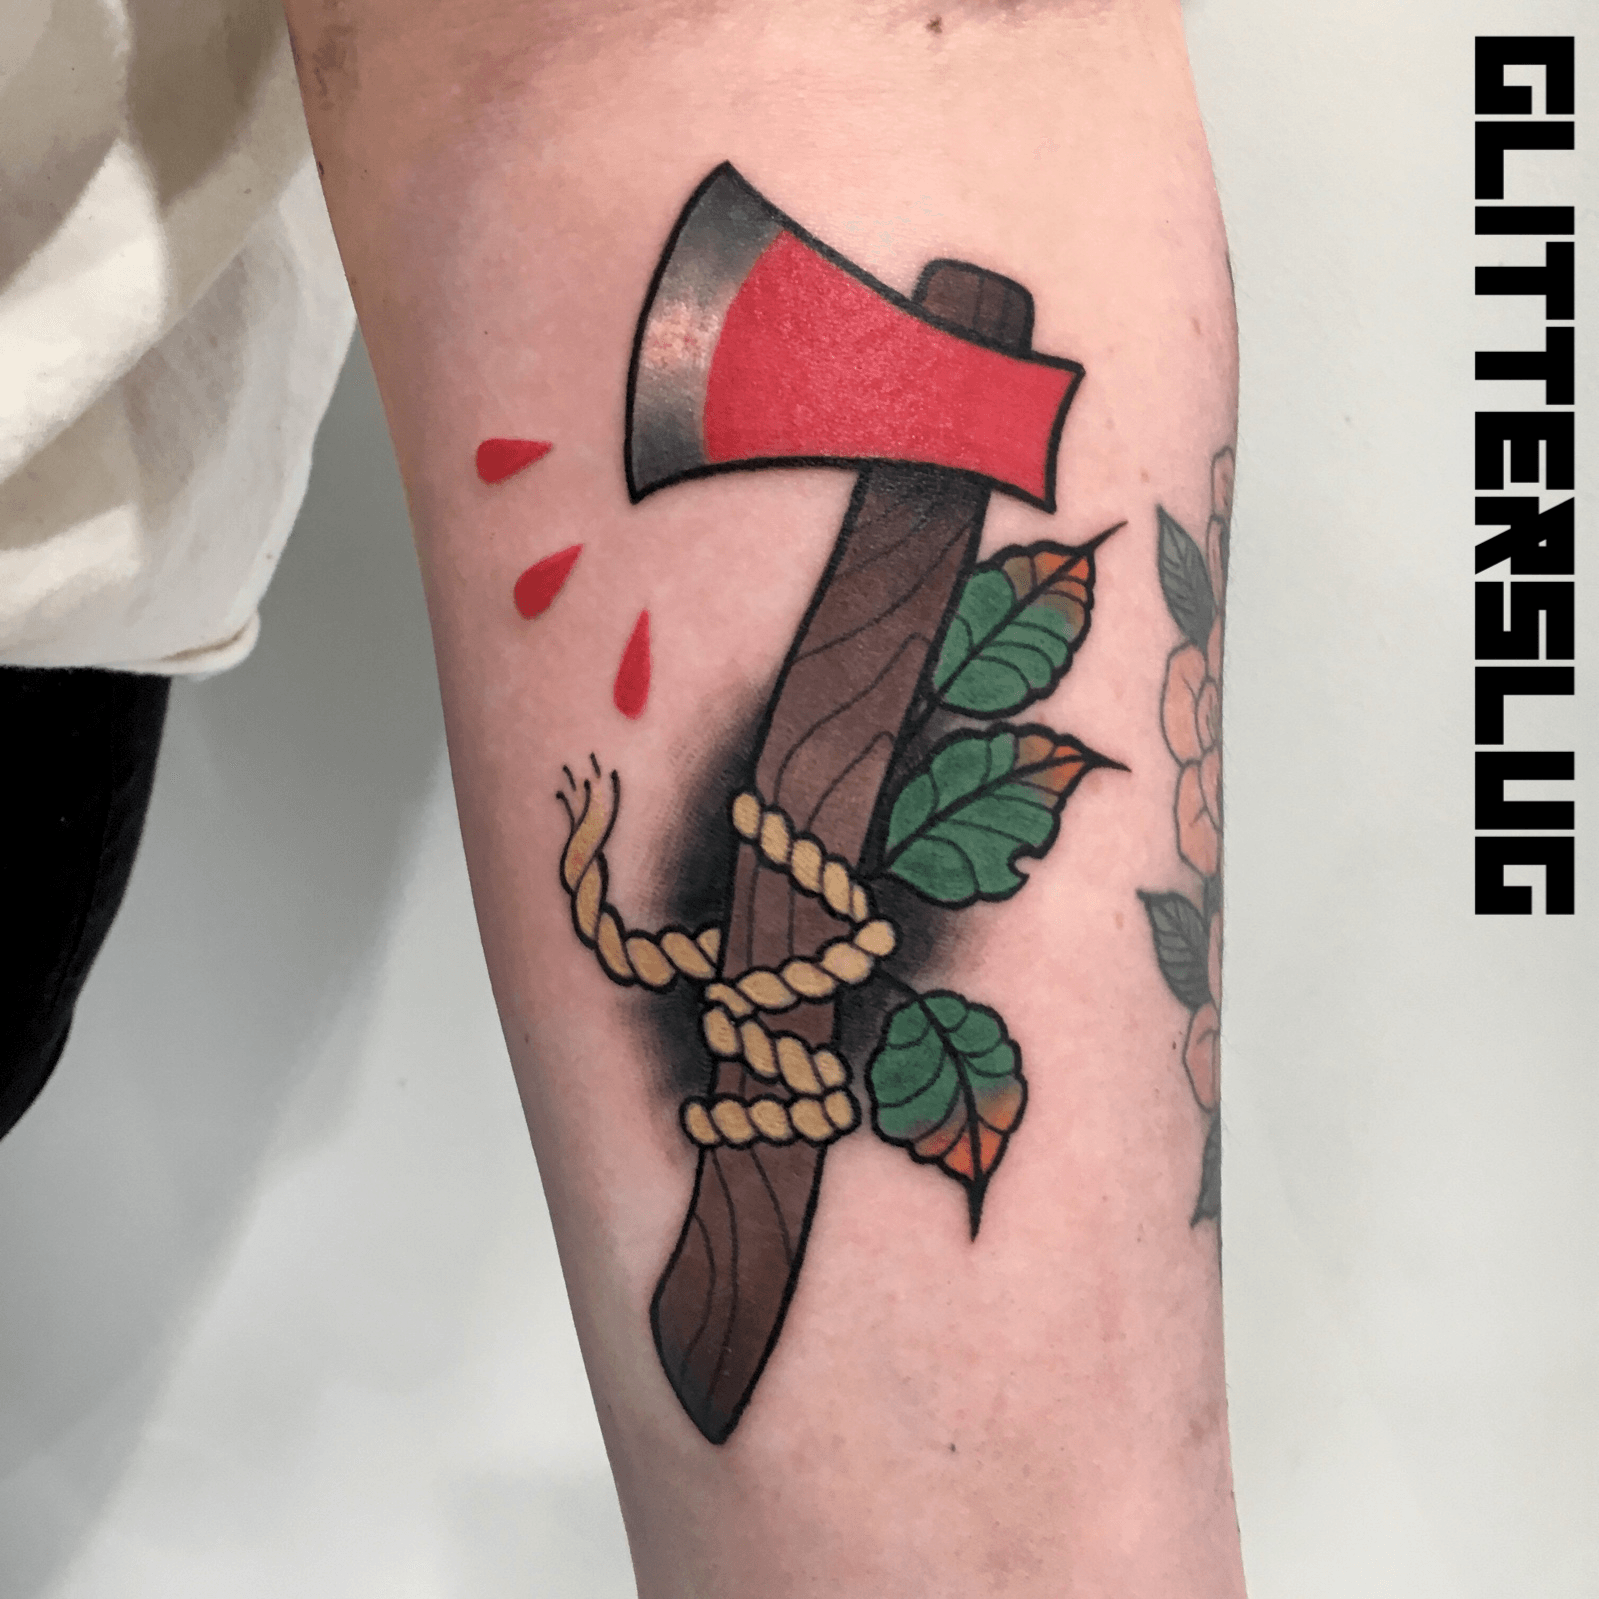 Tomahawk Tattoo Ideas In 2021  Meanings Designs And More